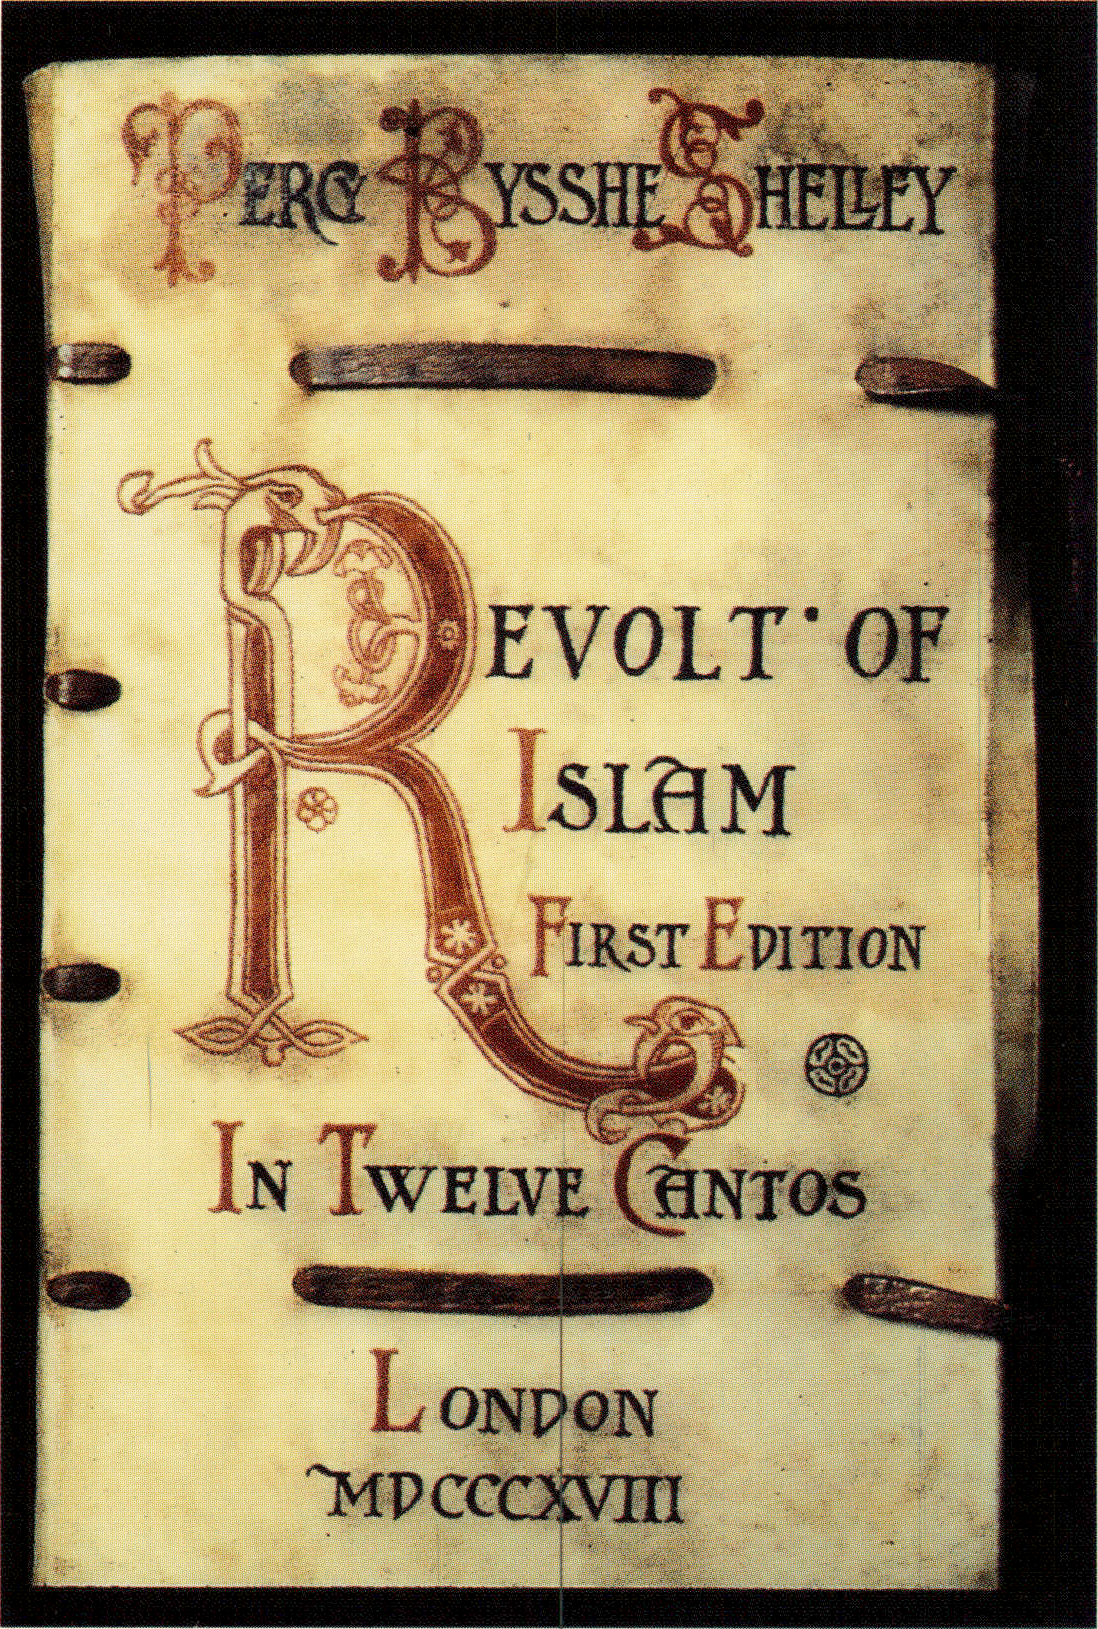 The Revolt of Islam (cover of first edition) by Percy Bysshe Shelley